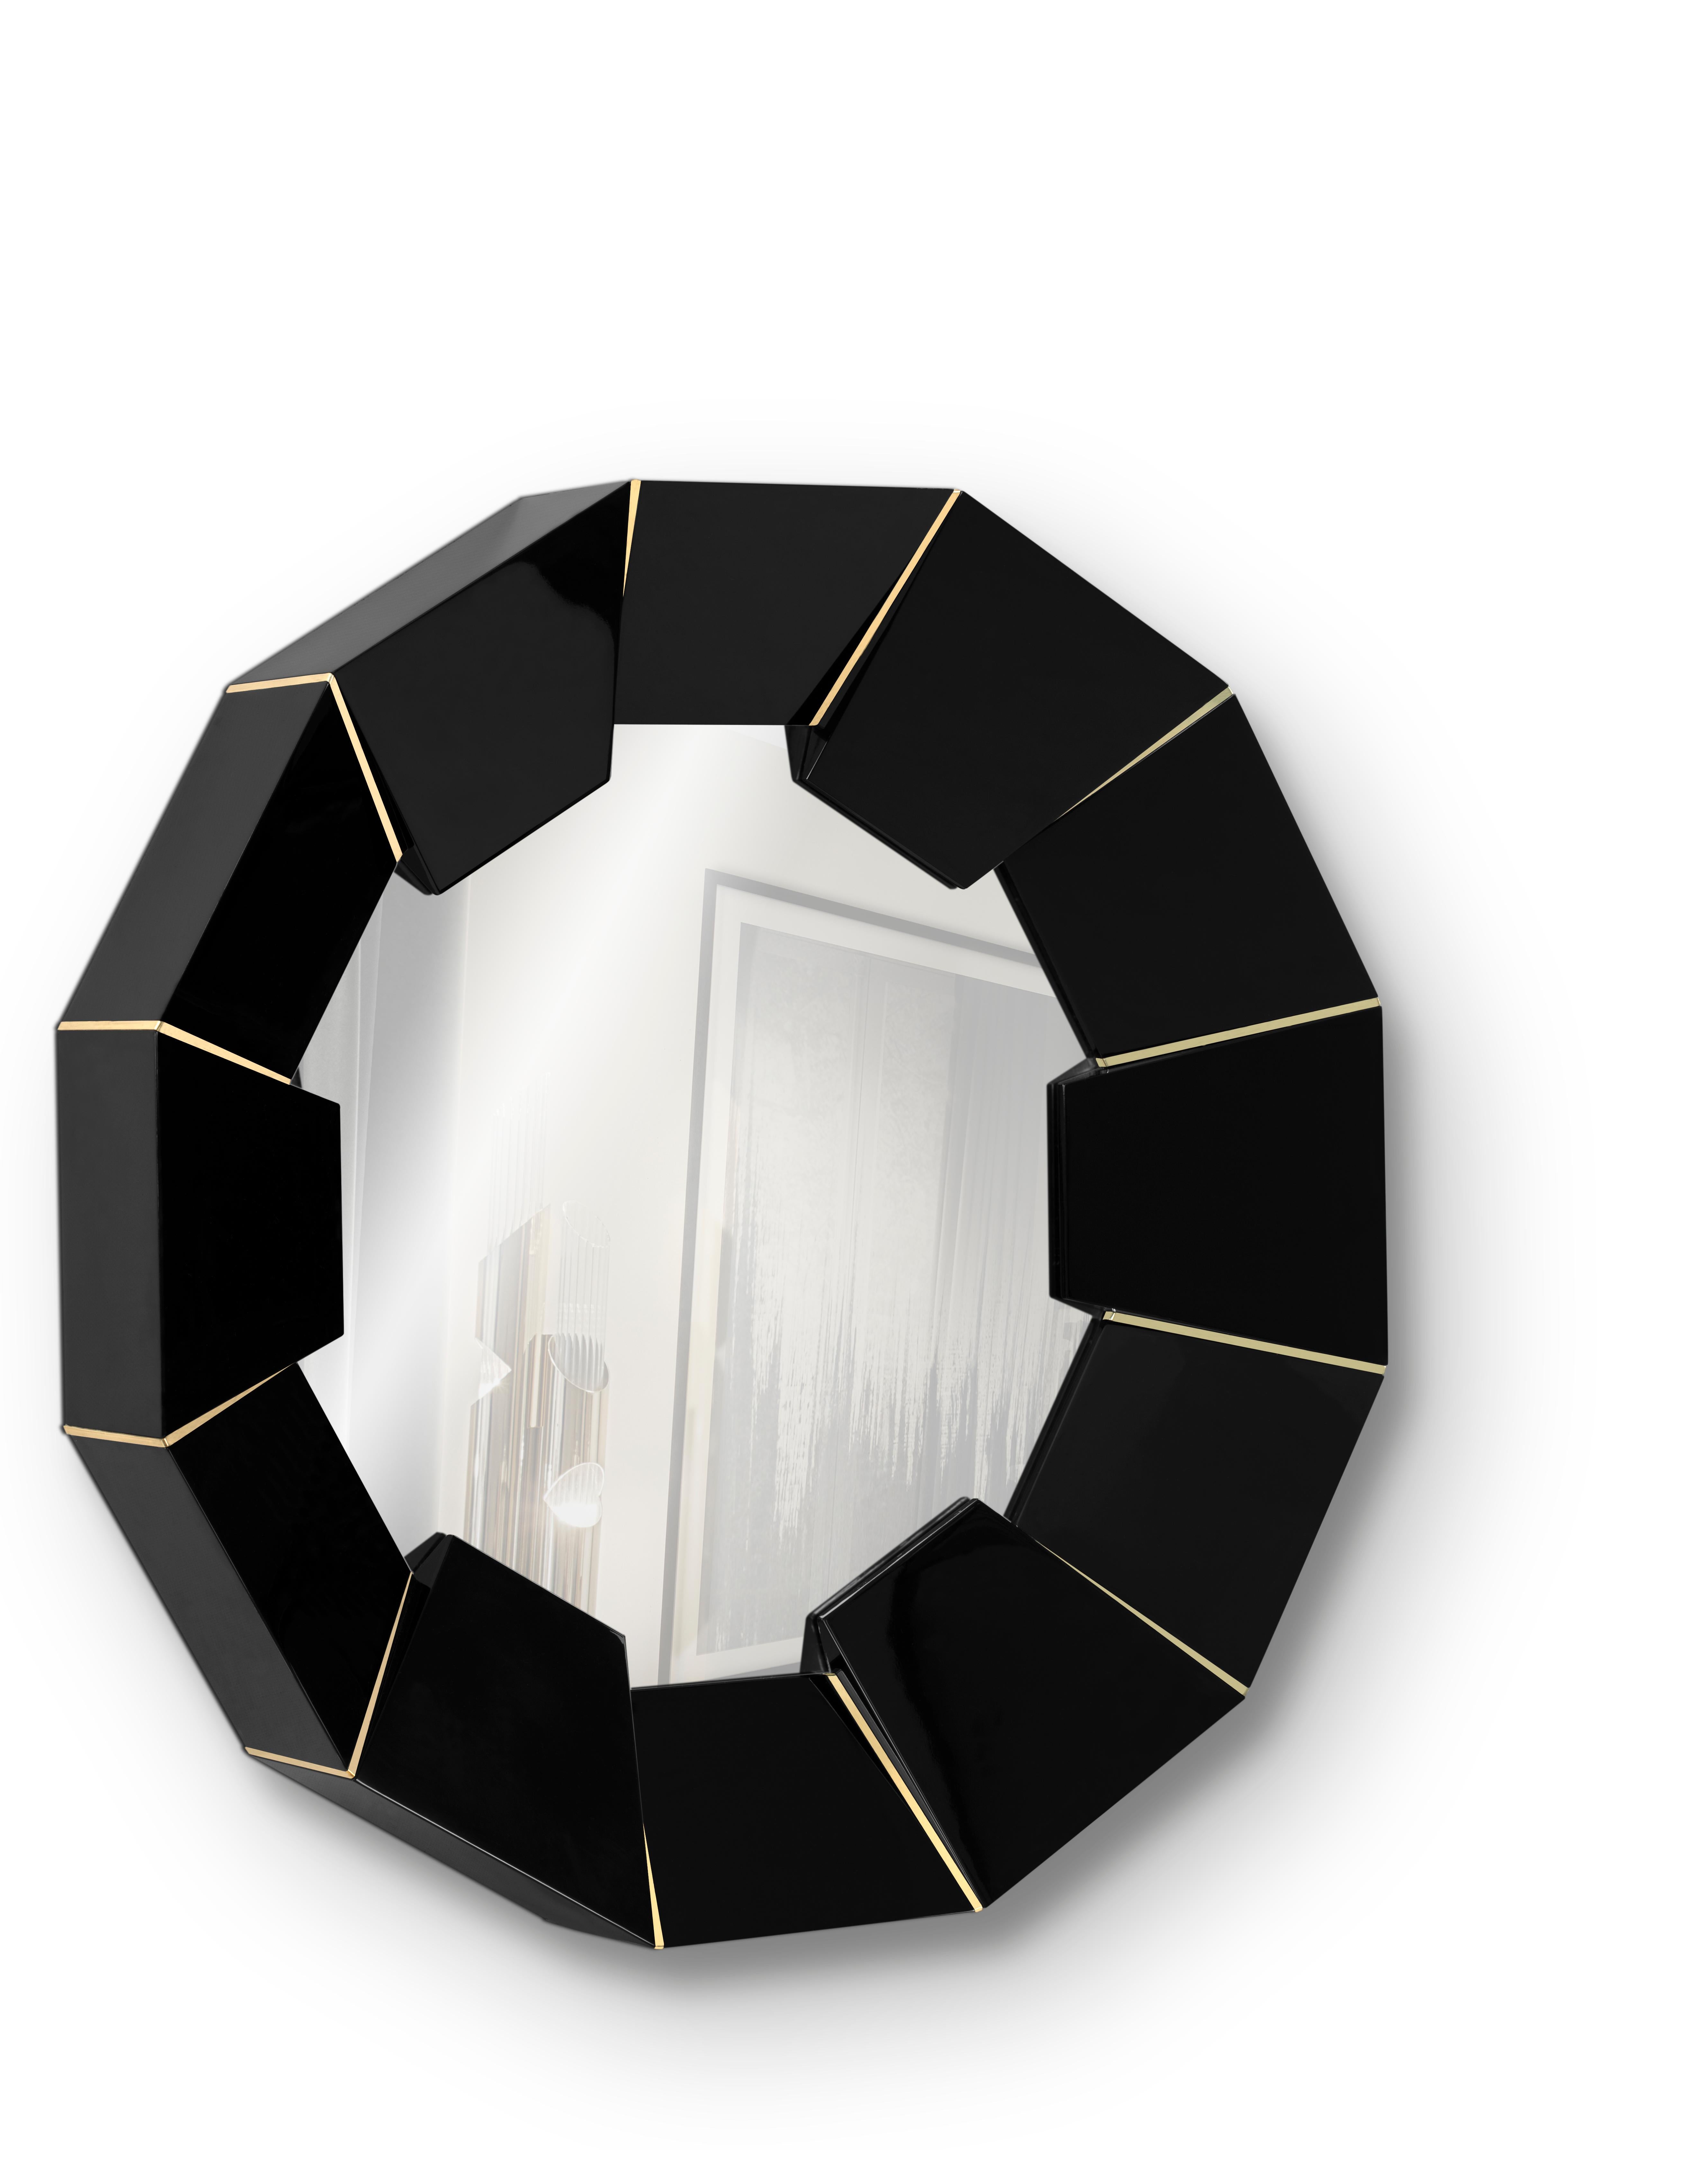 Materials like black lacquer and brass are combined into a perfect harmony in order to create a masterpiece like the Darian Black. A simple yet unique luxury item that captures both the functionality of a mirror and the splendor of an art piece.